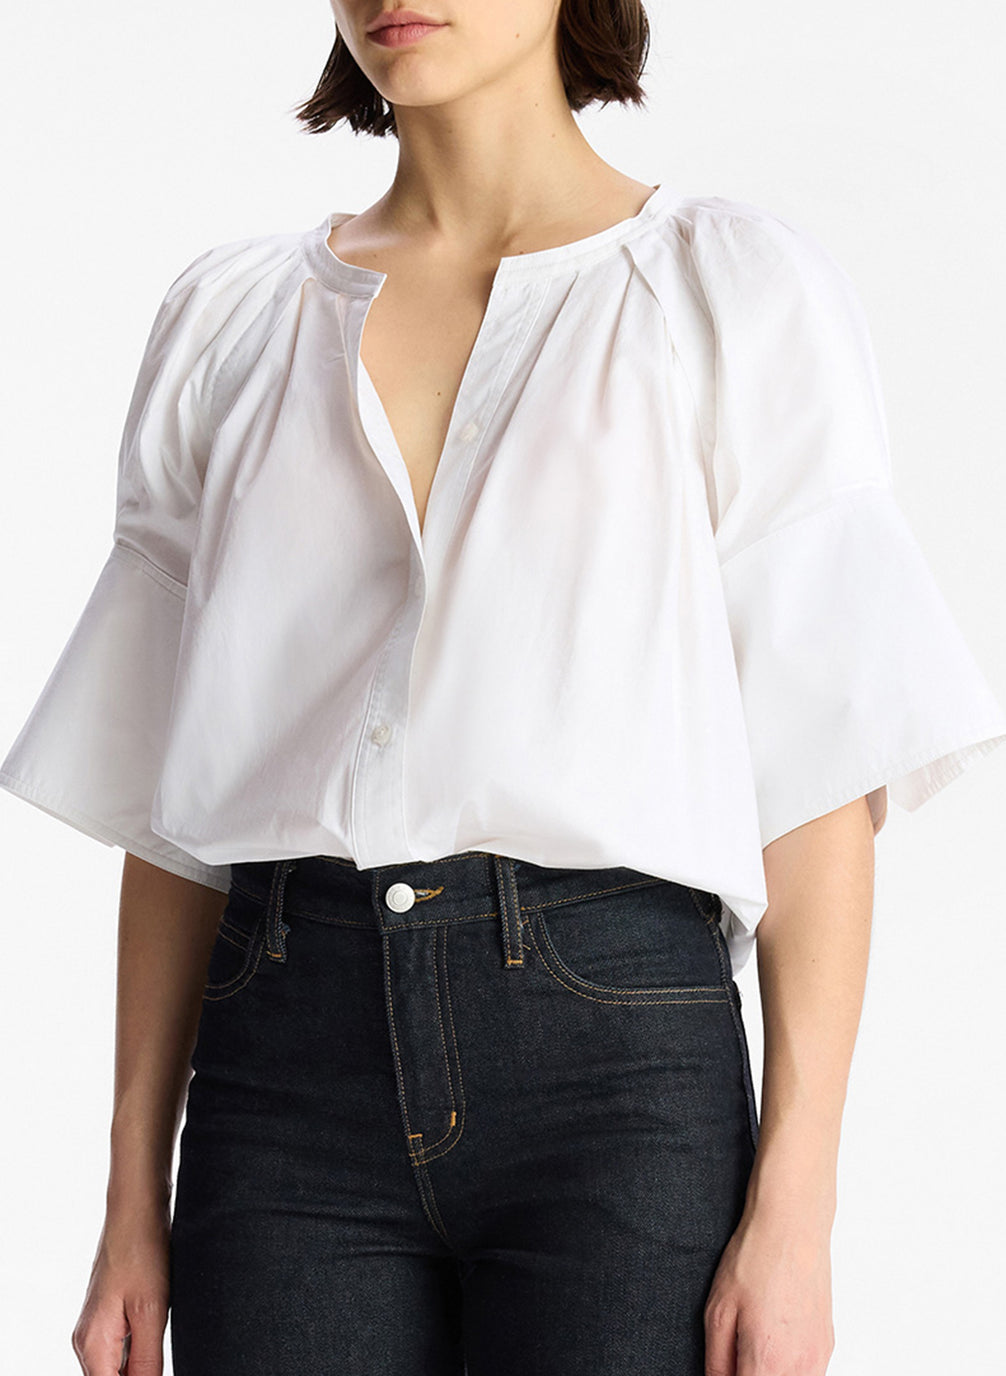 detail view of woman wearing white wide sleeve blouse and dark denim jeans